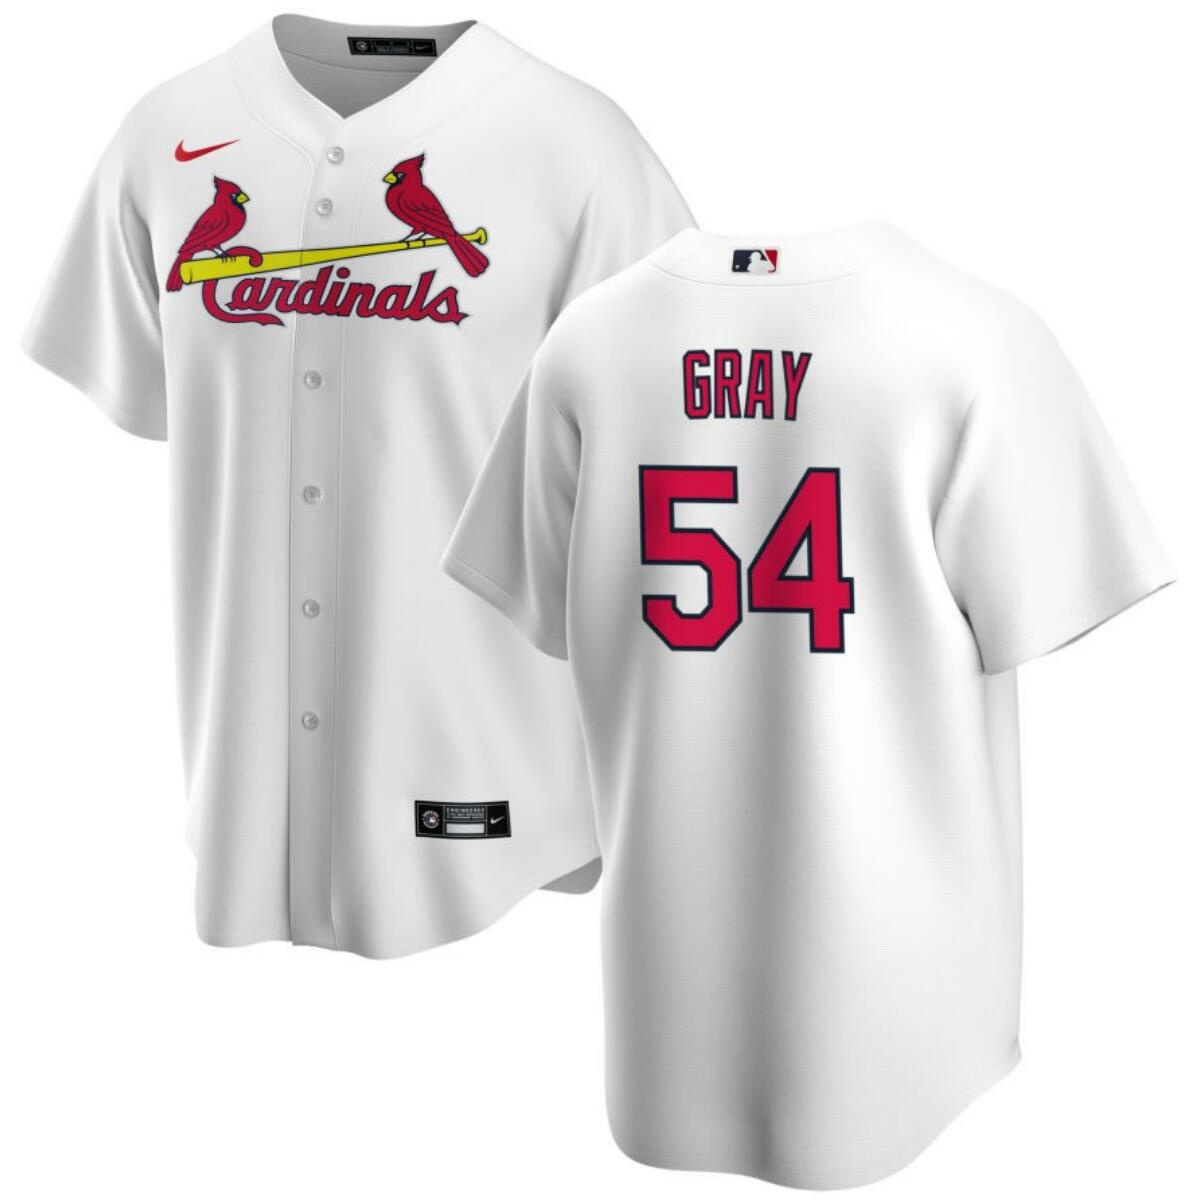 Men's St. Louis Cardinals #54 Sonny Gray Stitched White Cool Base Baseball Jersey